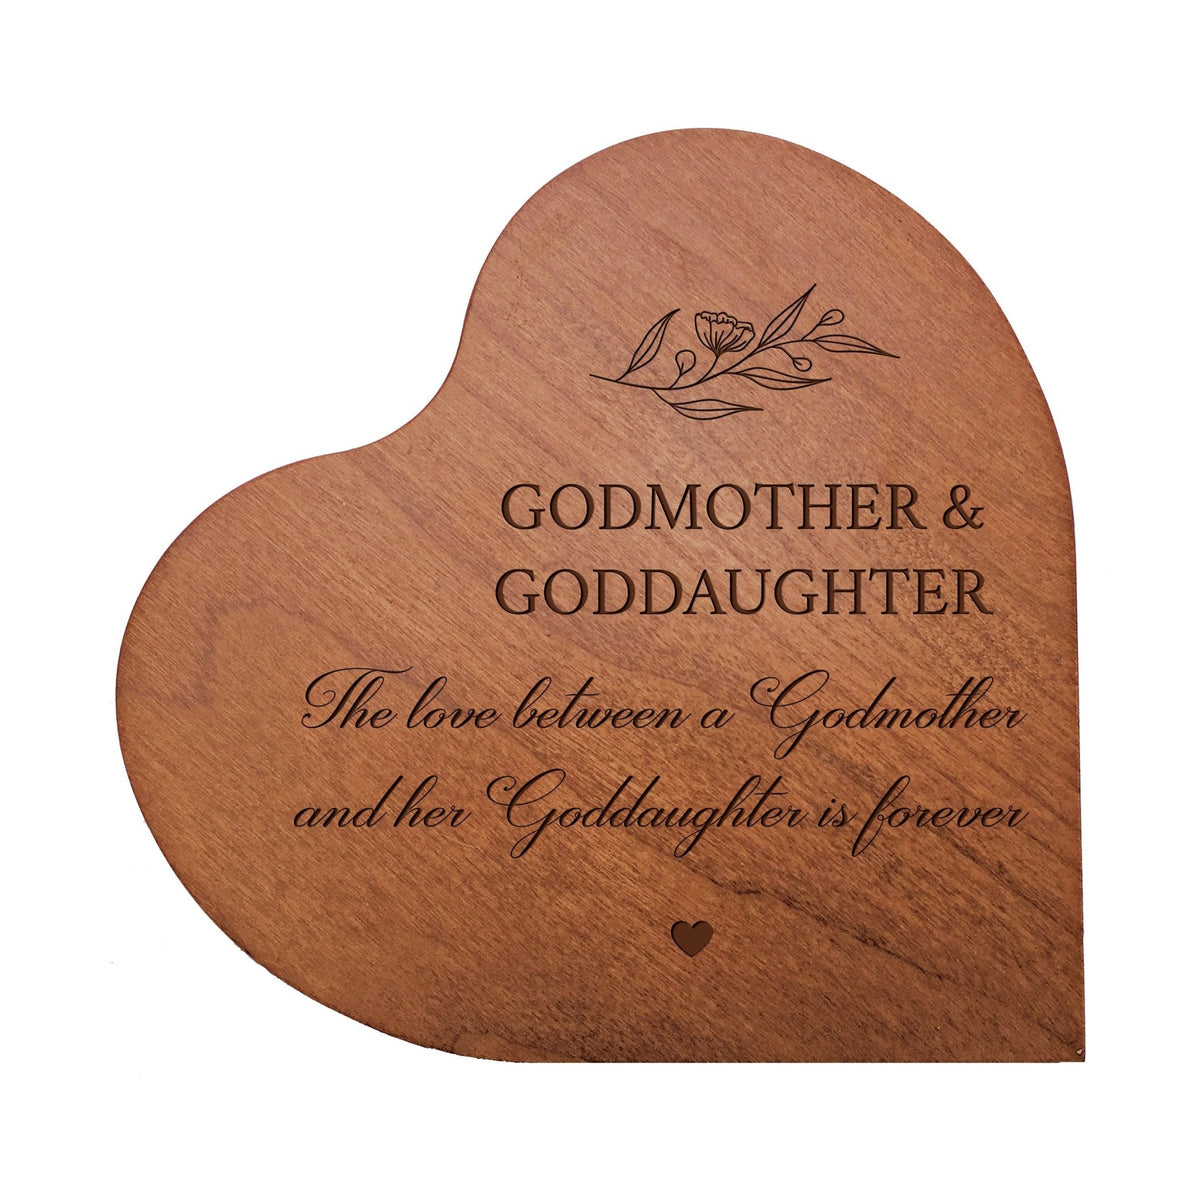 Modern Godmother’s Love Solid Wood Heart Decoration With Inspirational Verse Keepsake Gift 5x5.25 - Godmother &amp; Goddaughter - LifeSong Milestones